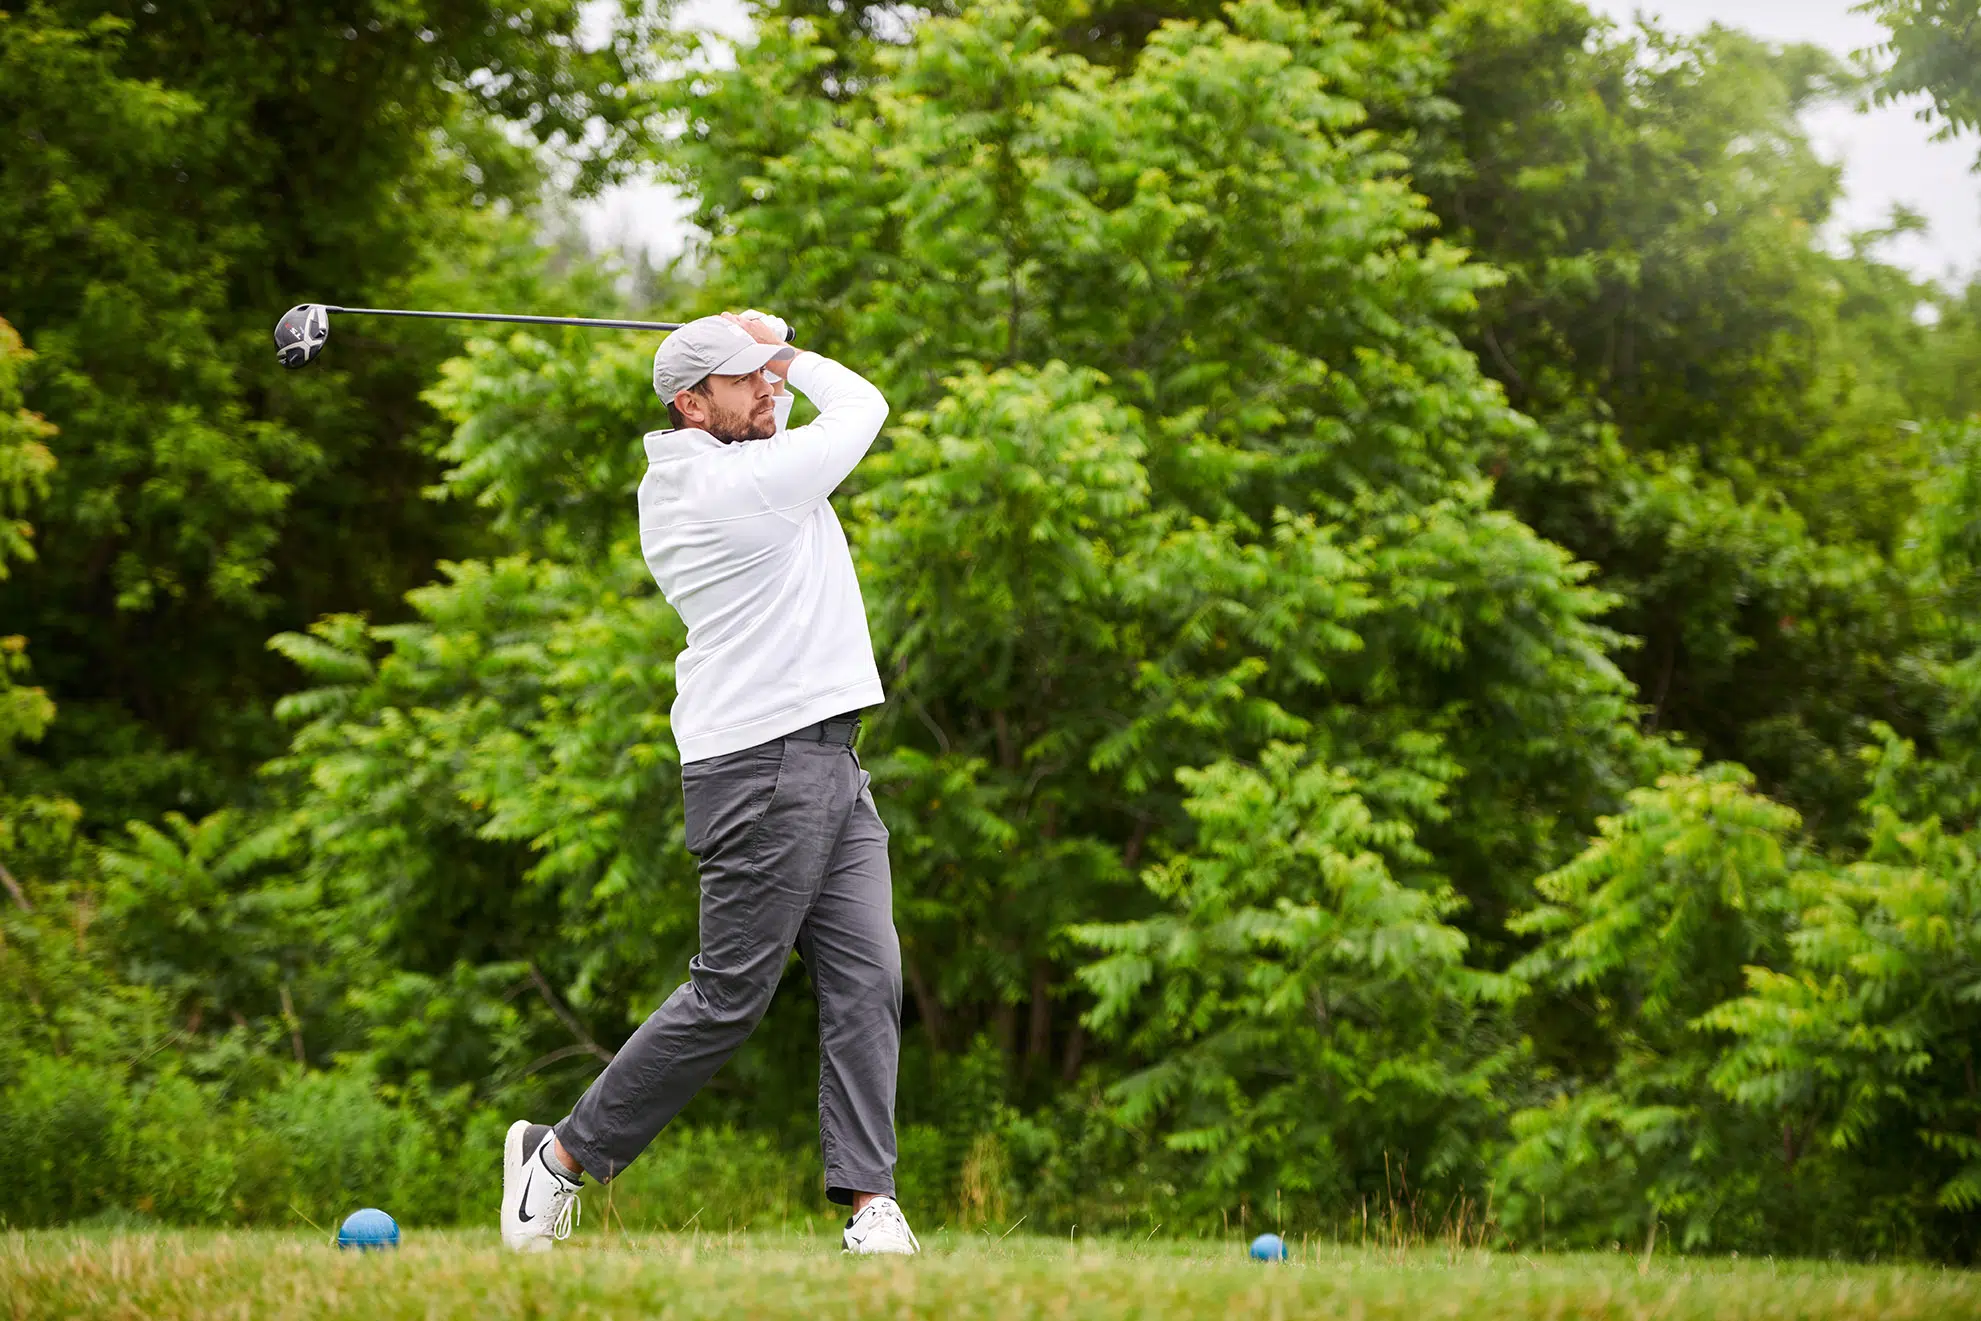 A golfer tees off with a forest background.